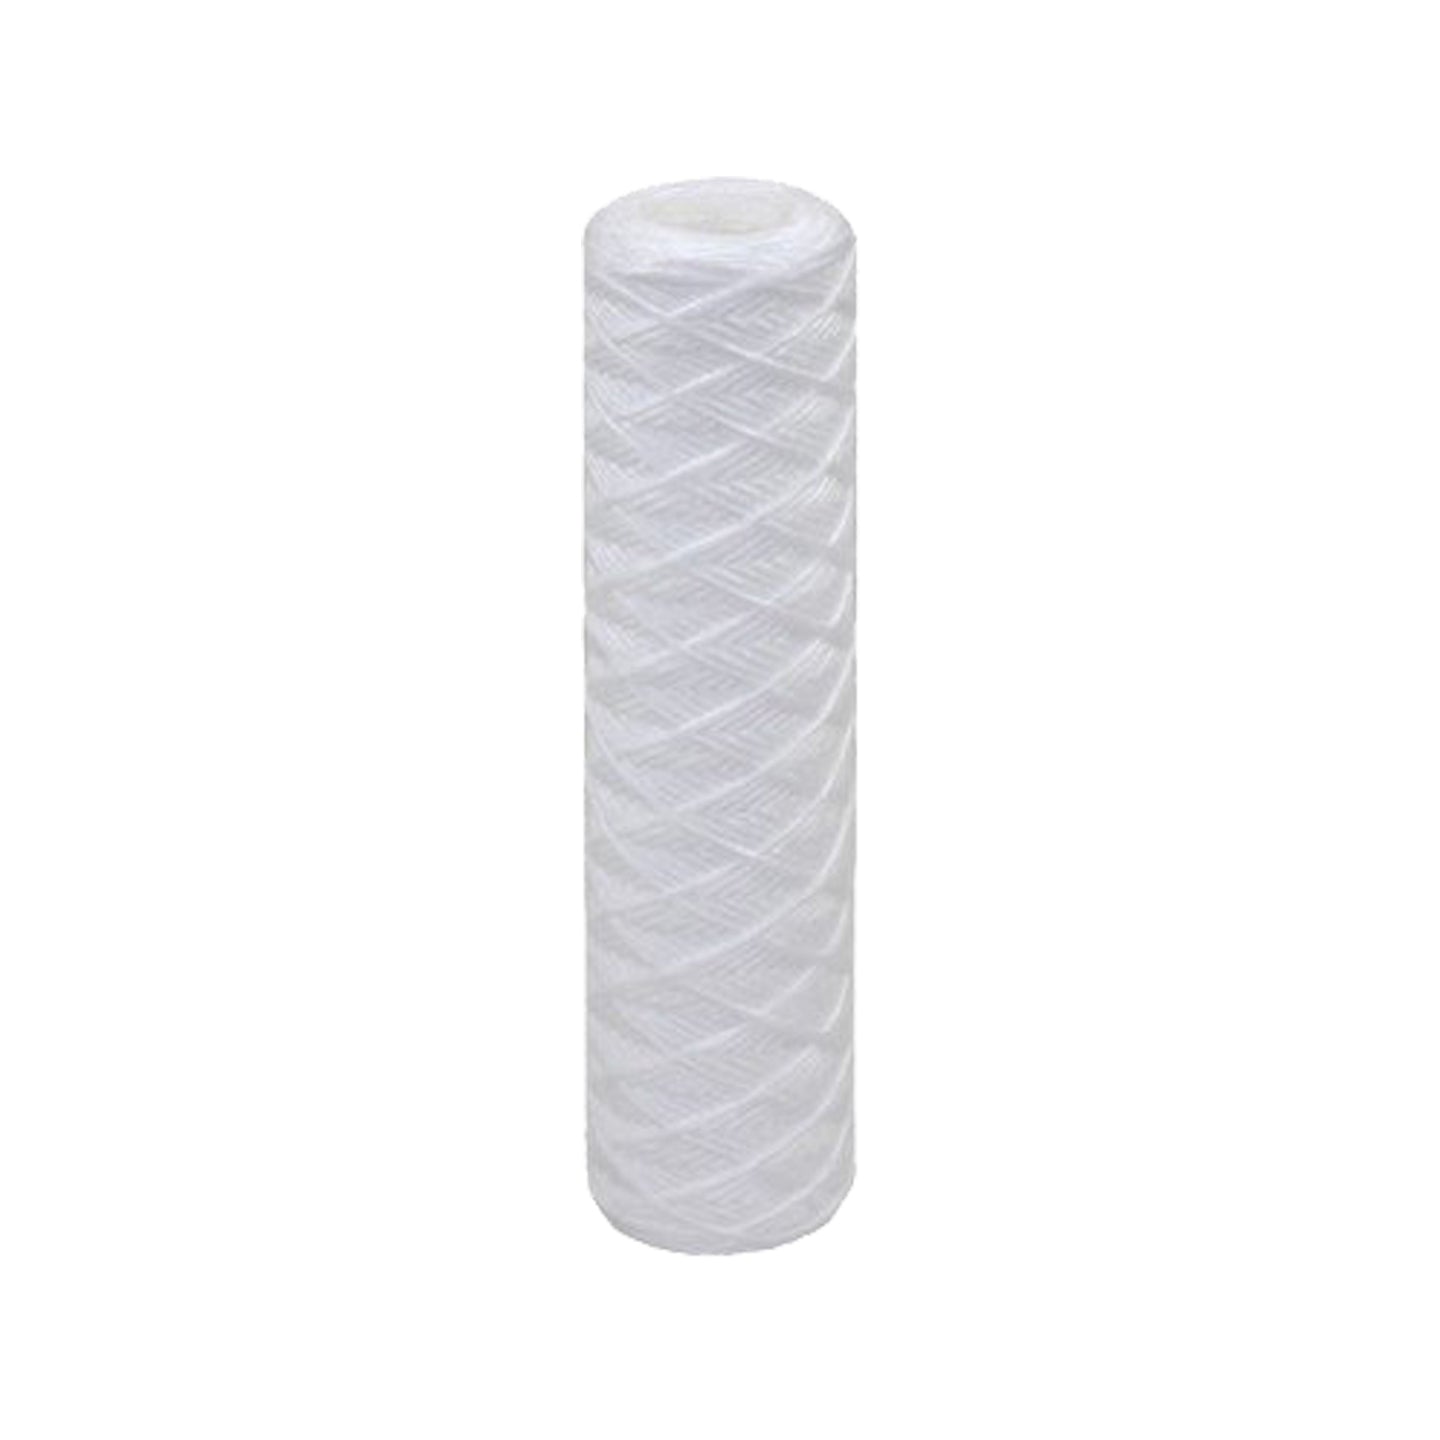 SWC-45-2030 Hydronix Comparable String Wound Sediment Water Filter (30 micron) by Tier1